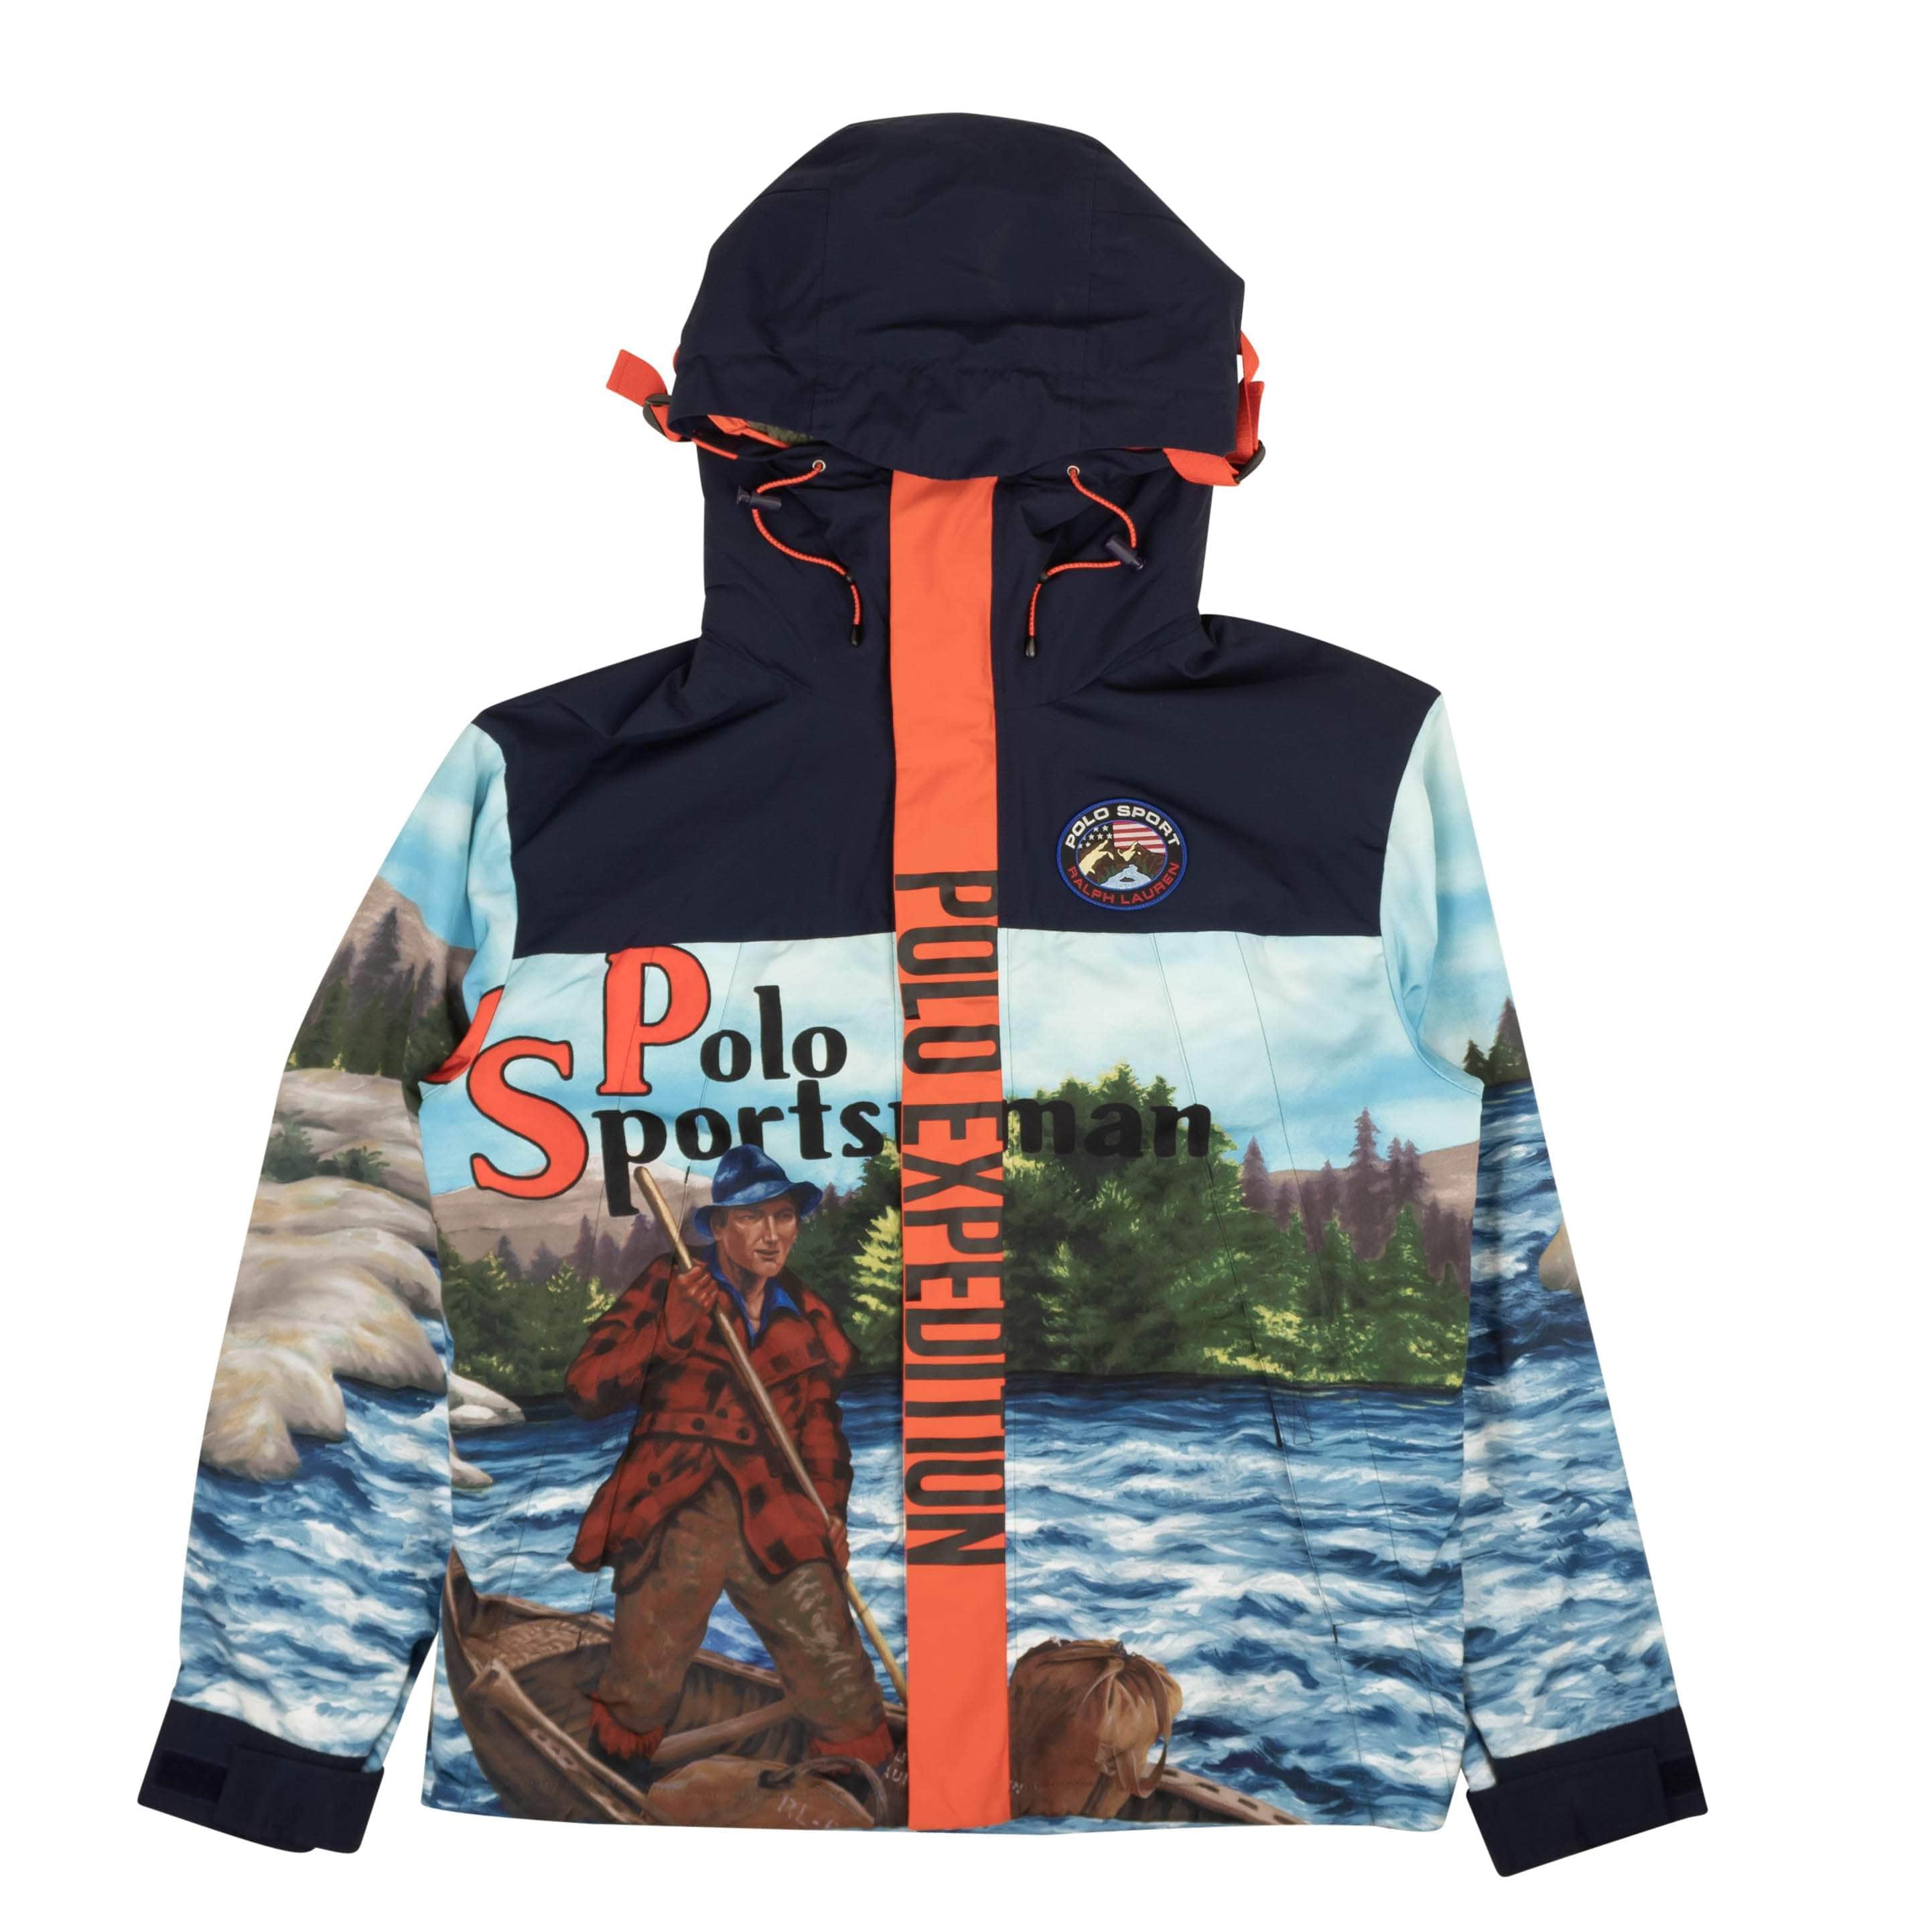 Ralph Lauren 2000-5000, channelenable-all, chicmi, couponcollection, gender-mens, main-clothing, mens-raincoats, mens-shoes, ralph-lauren, size-l, size-m, size-s, size-xl, size-xxl Navy River Guide Anorak Jacket